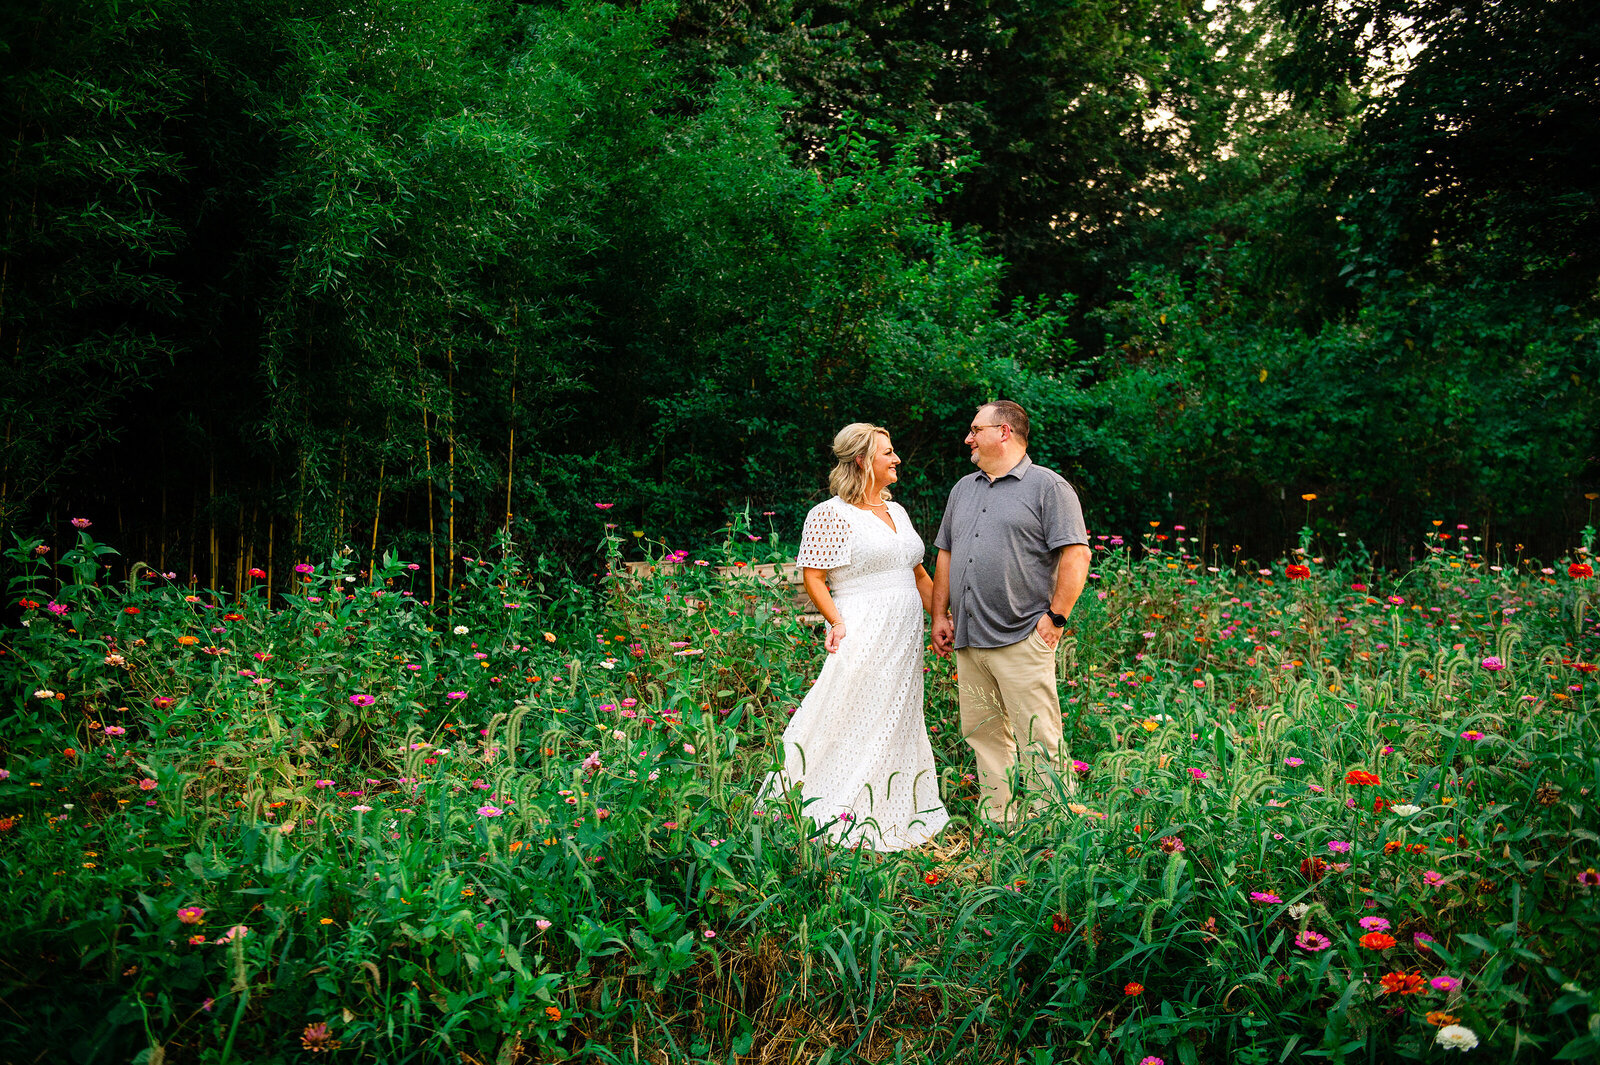 Girl wearing white dress holding hands with fiance in a flower field